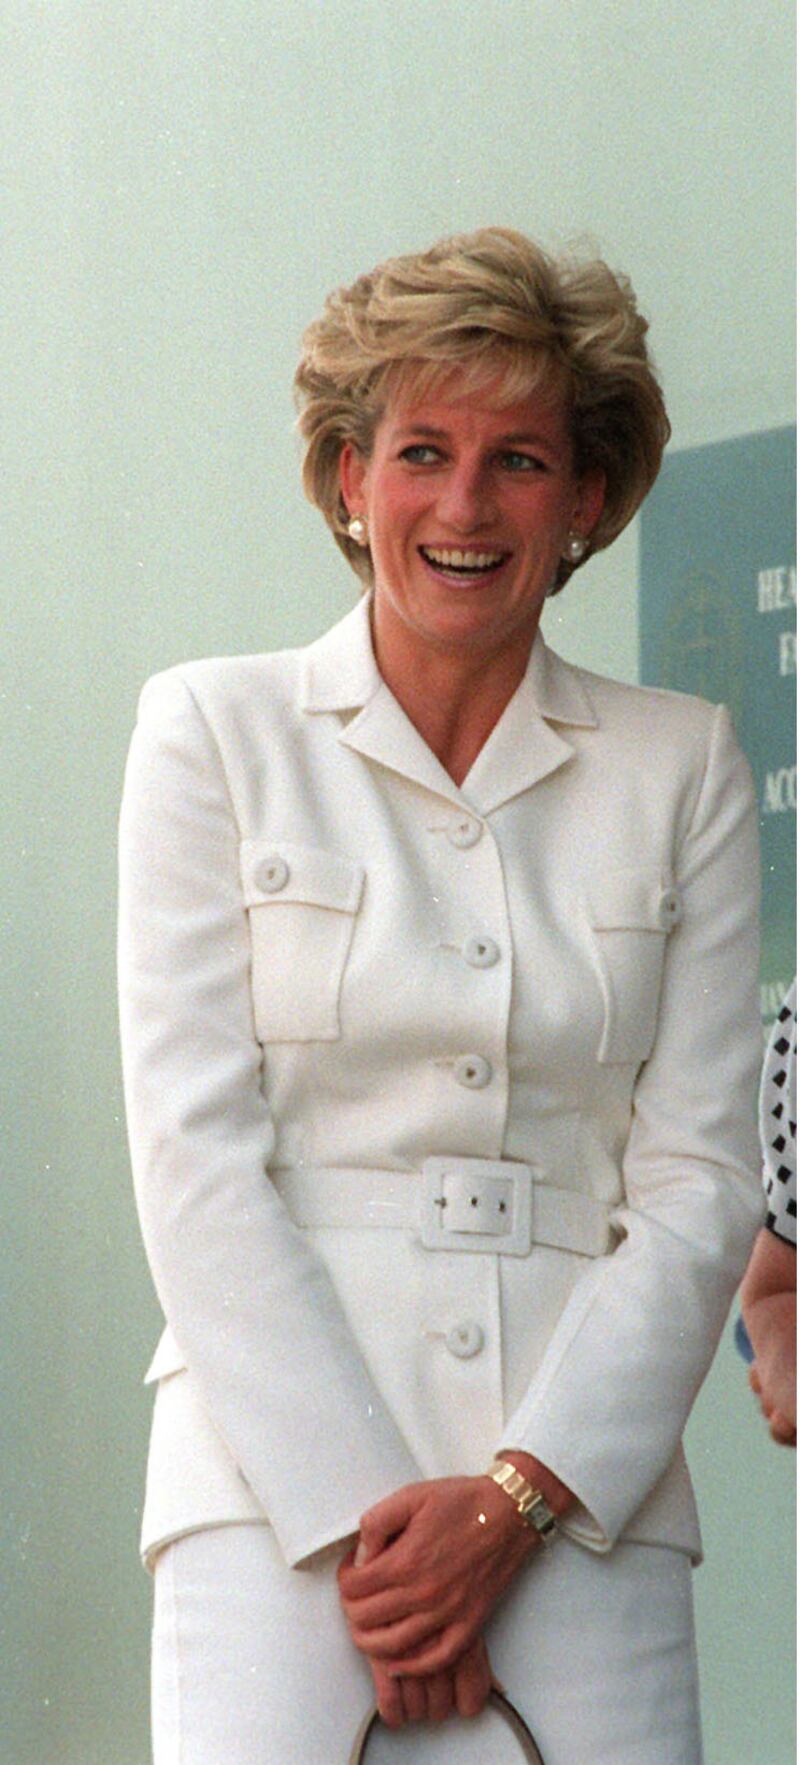 NOV 1996 - DIANA, PRINCESS OF WALES ARRIVING AT THE SACRED HEART HOSPICE IN SYDNEY. (Photo by Patrick Riviere/Getty Images)